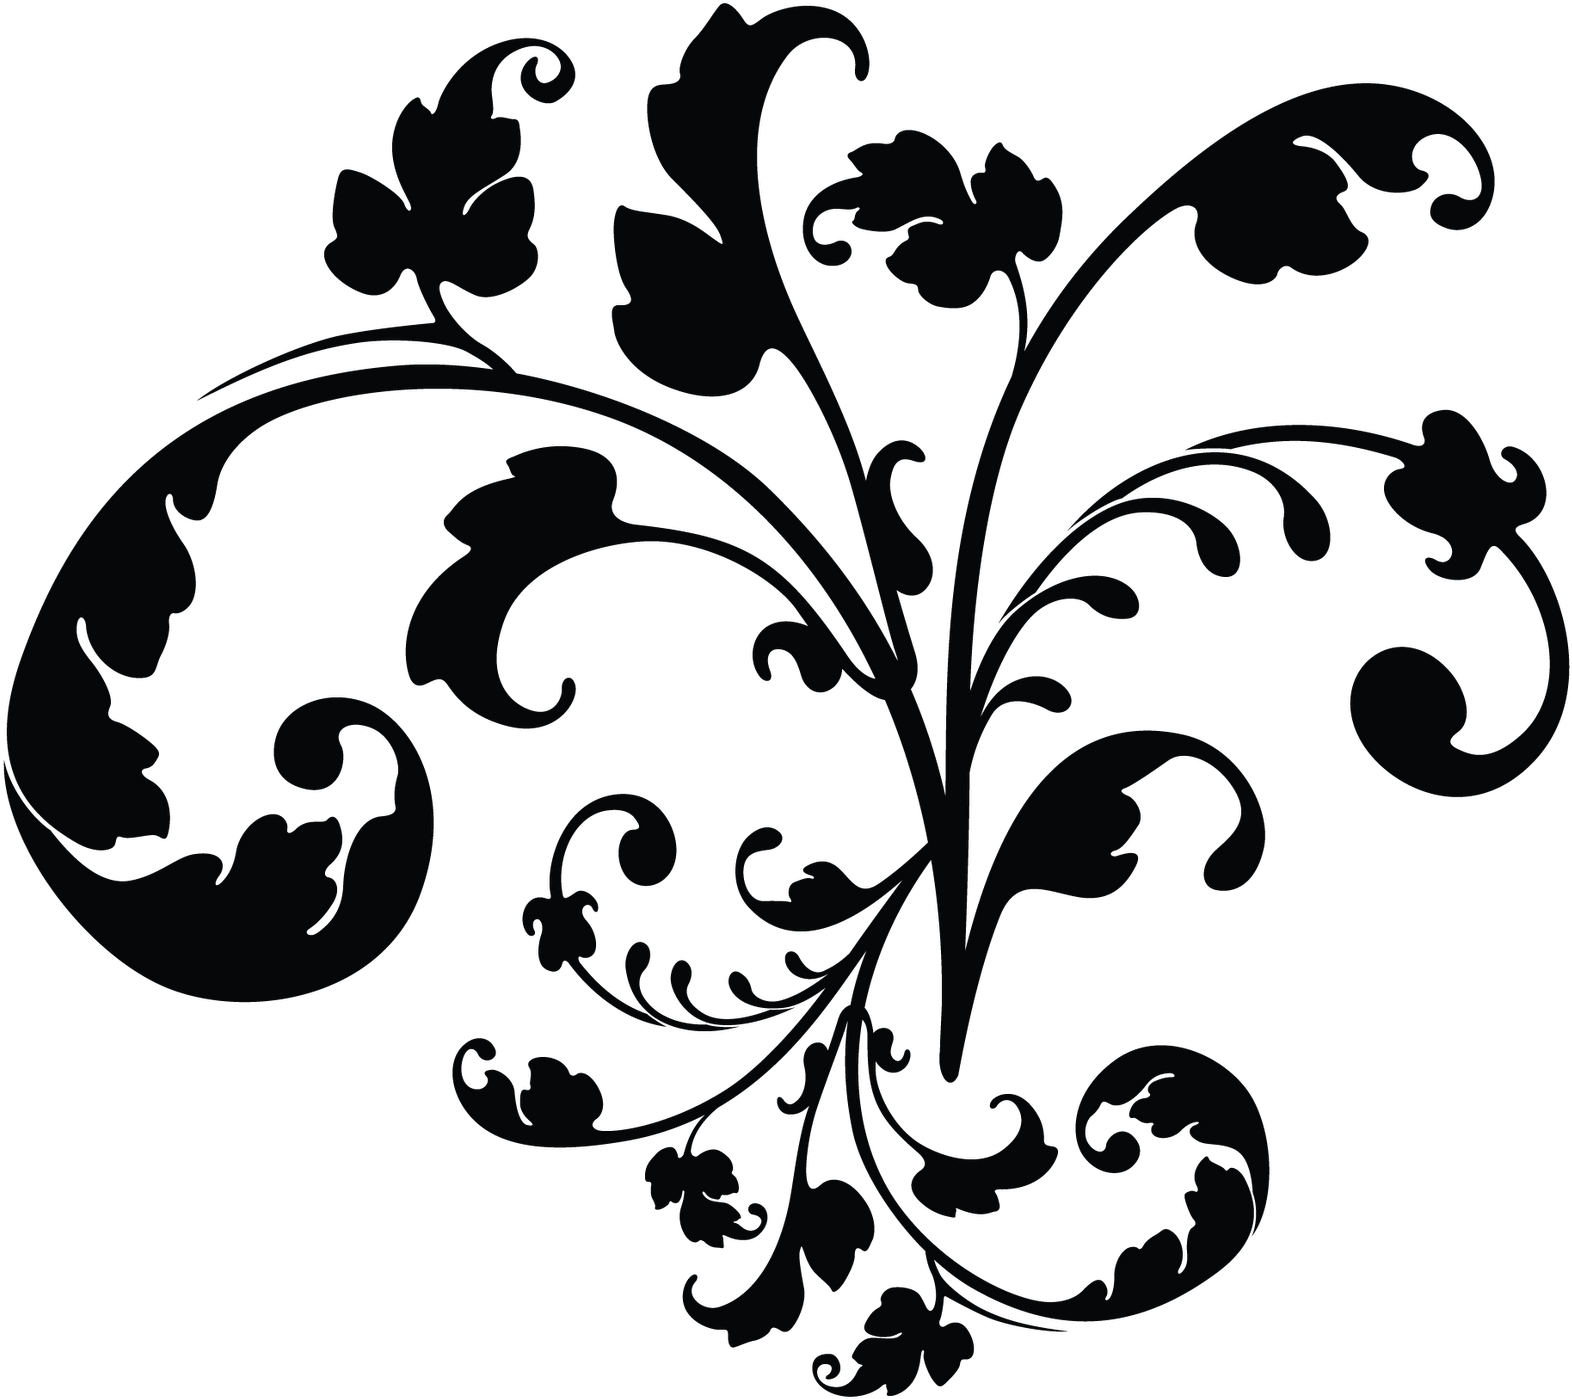 A Black And White Floral Design